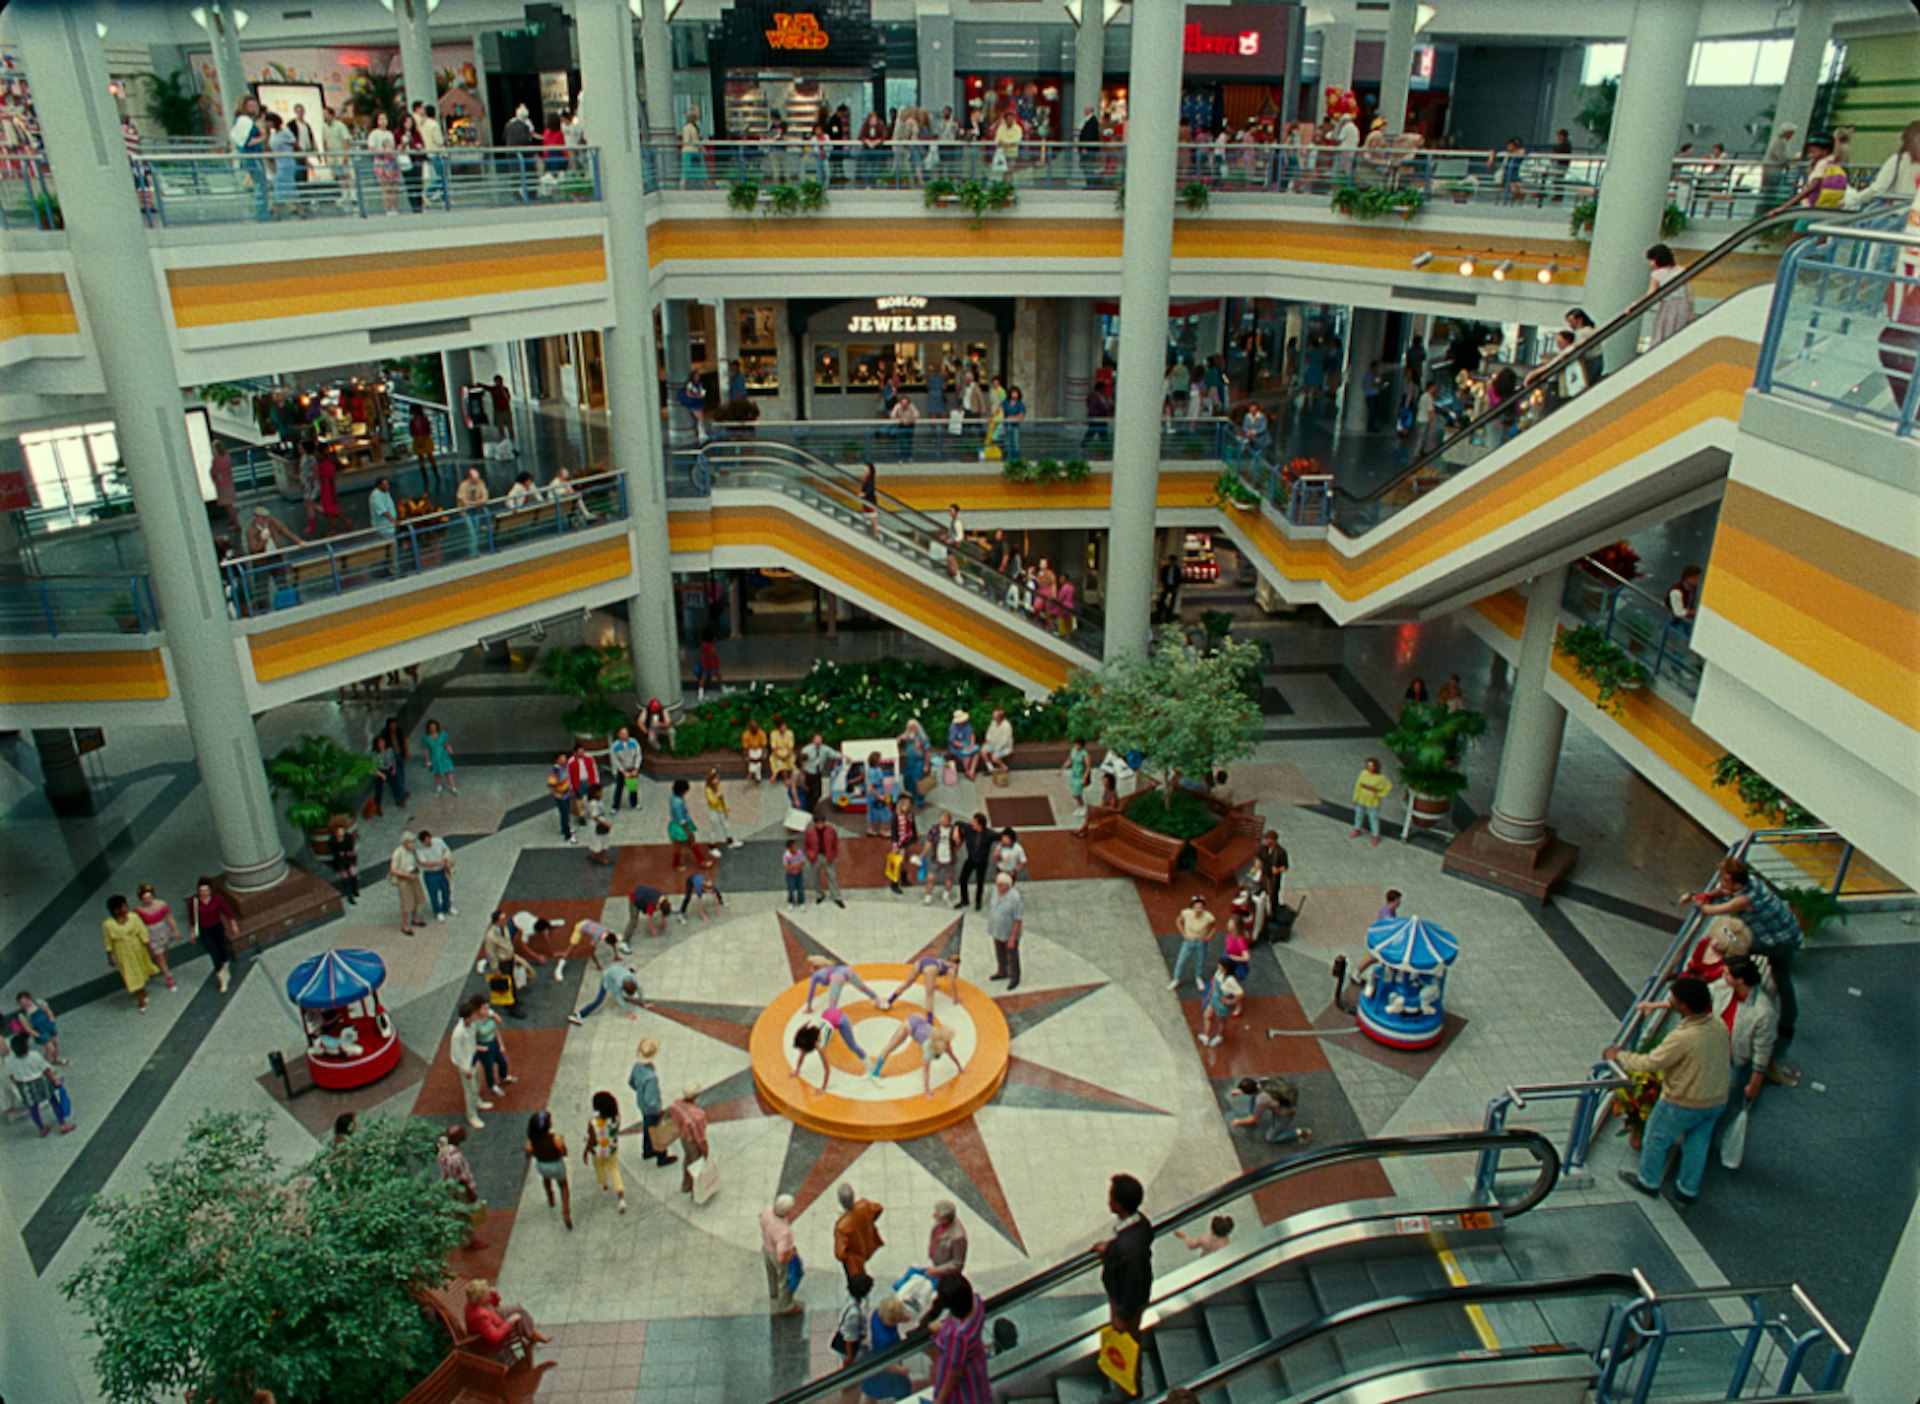 A still of the mall scene from Wonder Woman 1984